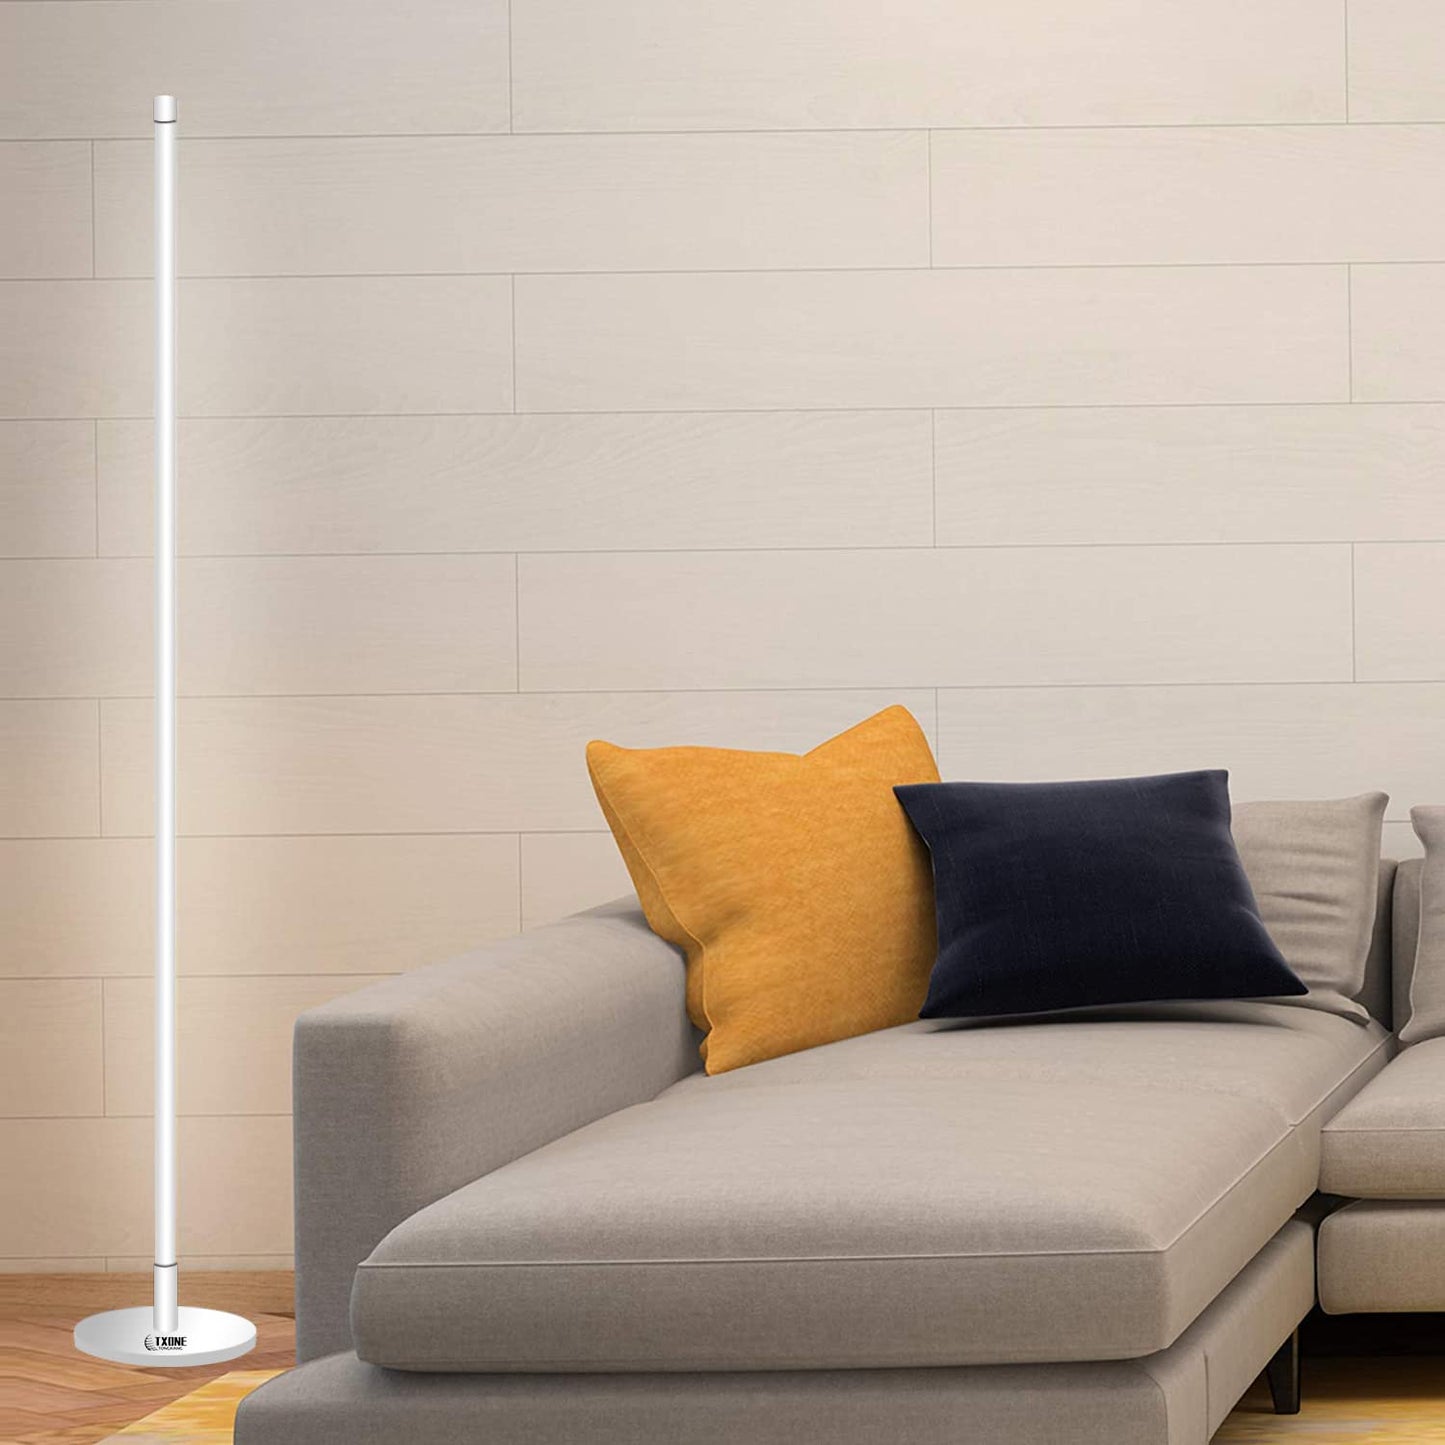 Modern Floor Lamp Led Standing Corner Lamp White Decor Contemporary Metal Floor Lamp for Living Room Bedrooms with Remote & Touch Control - Like New